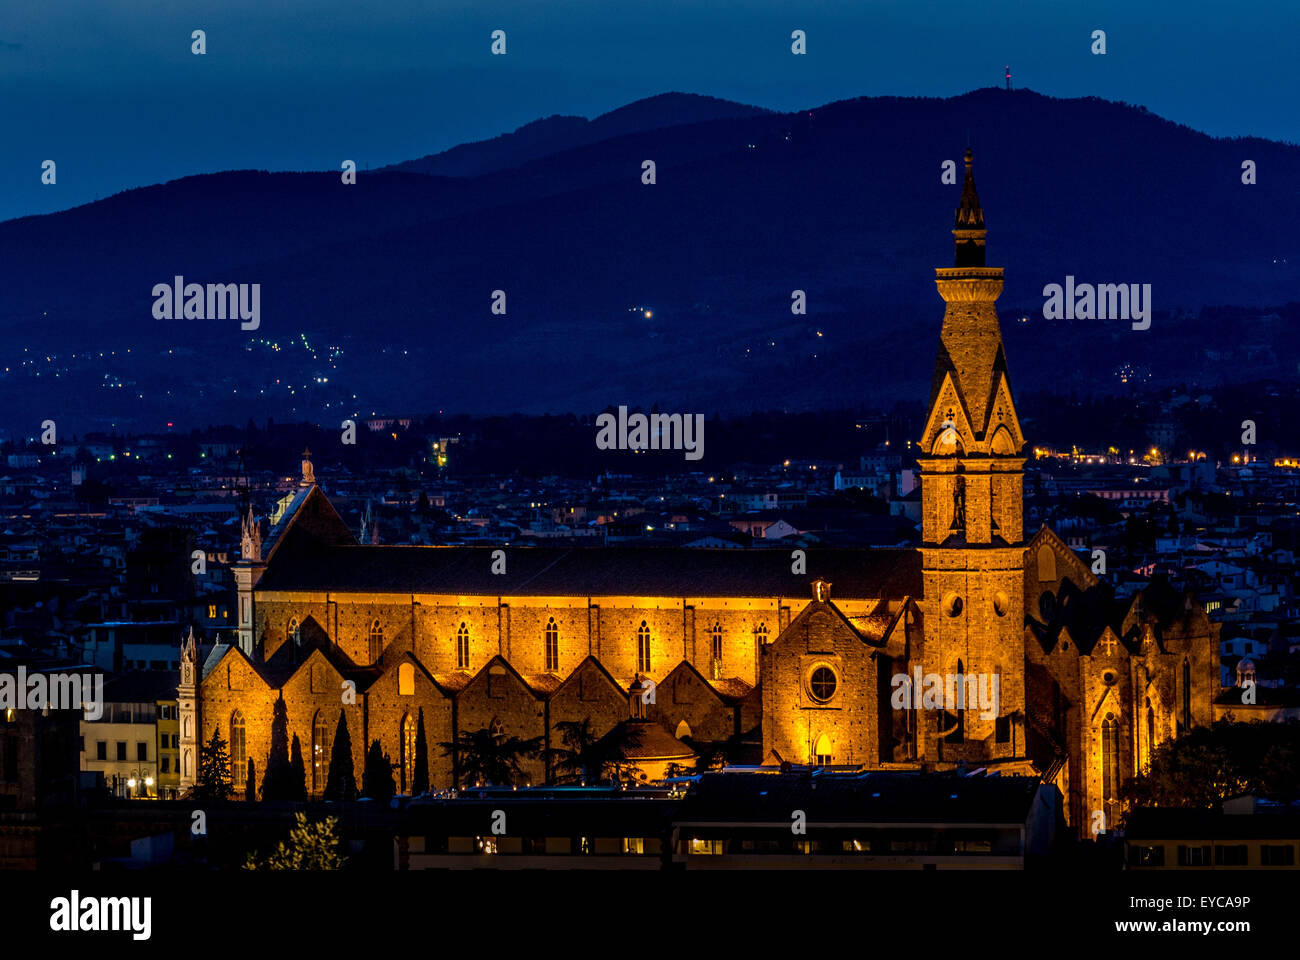 Basilica of Santa Croce, Florence, Italy. Buried place of Michelangelo and Galileo. Stock Photo